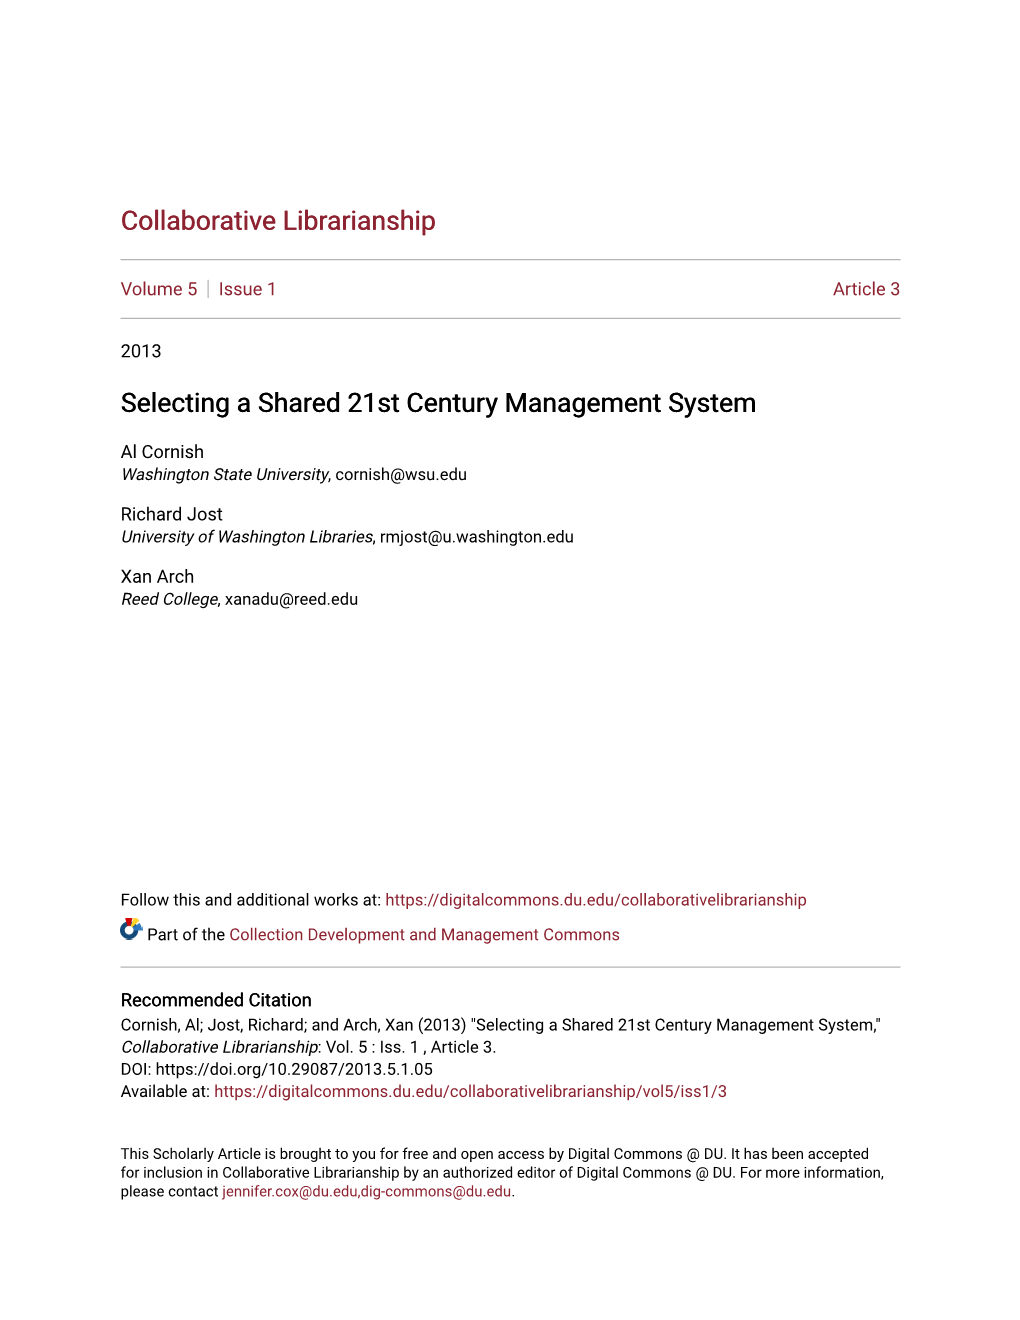 Selecting a Shared 21St Century Management System